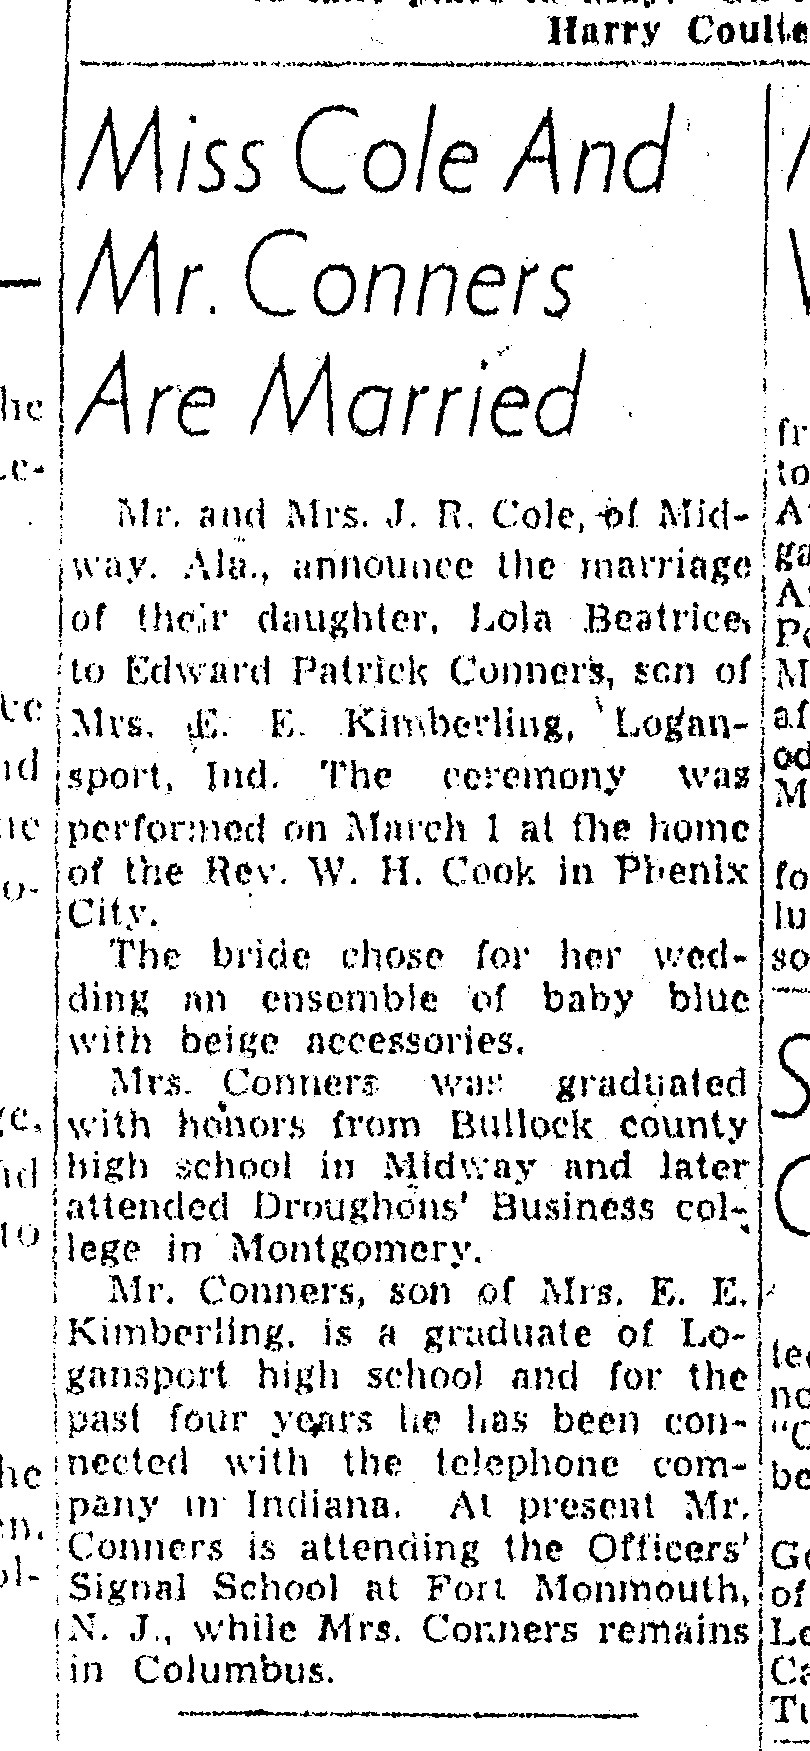 Marriage Announcment of Edward Conners and Lola Beatrice